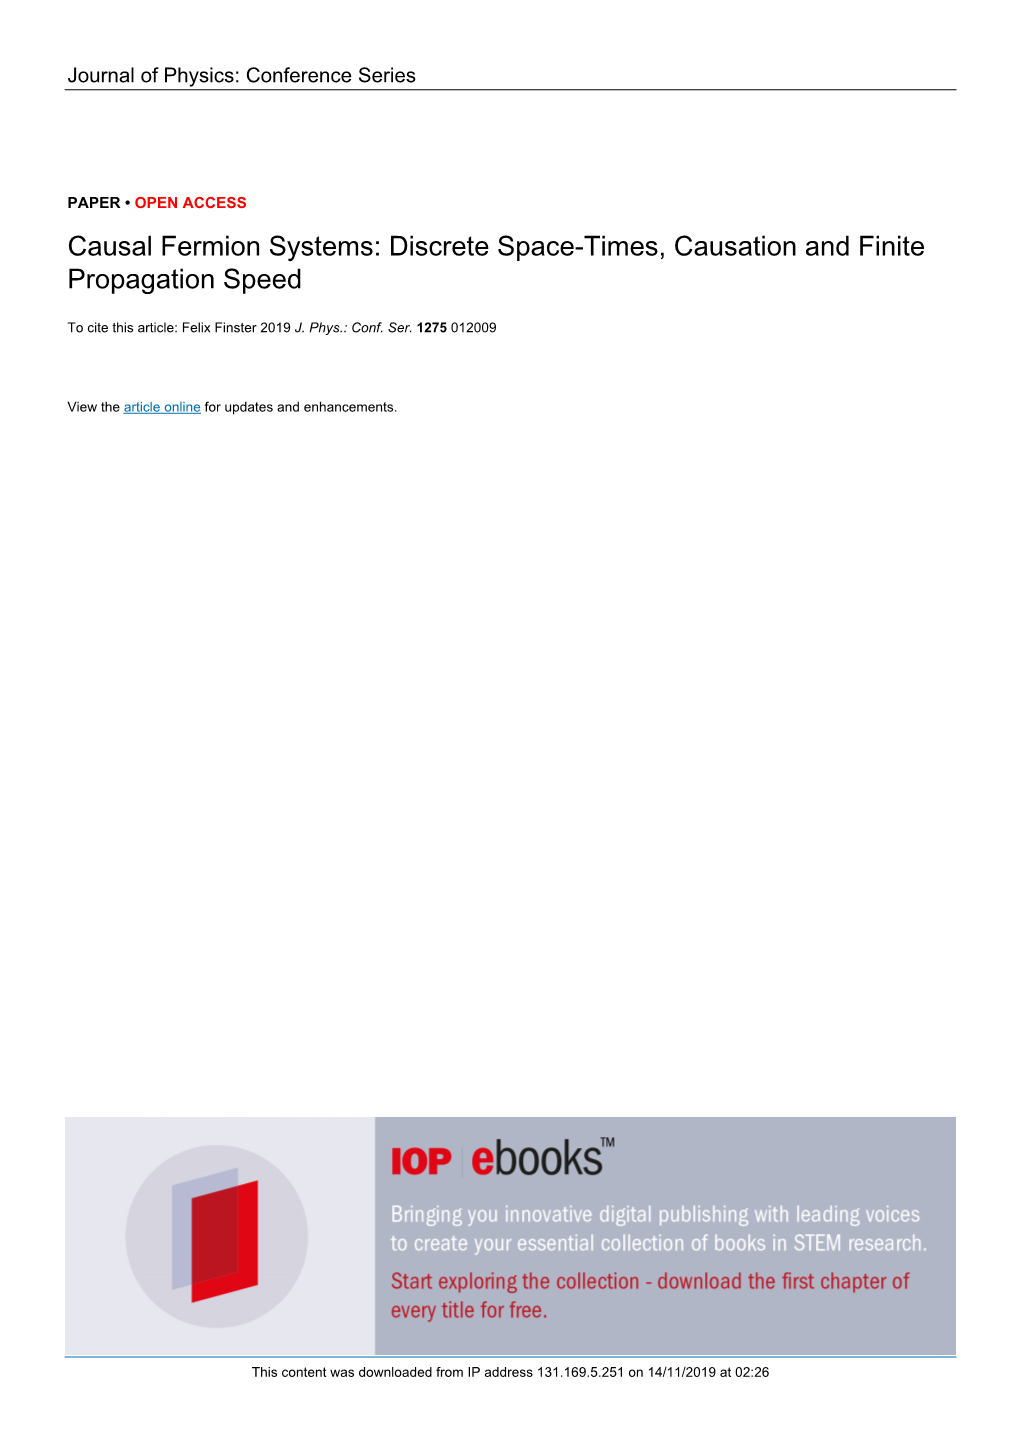 Causal Fermion Systems: Discrete Space-Times, Causation and Finite Propagation Speed